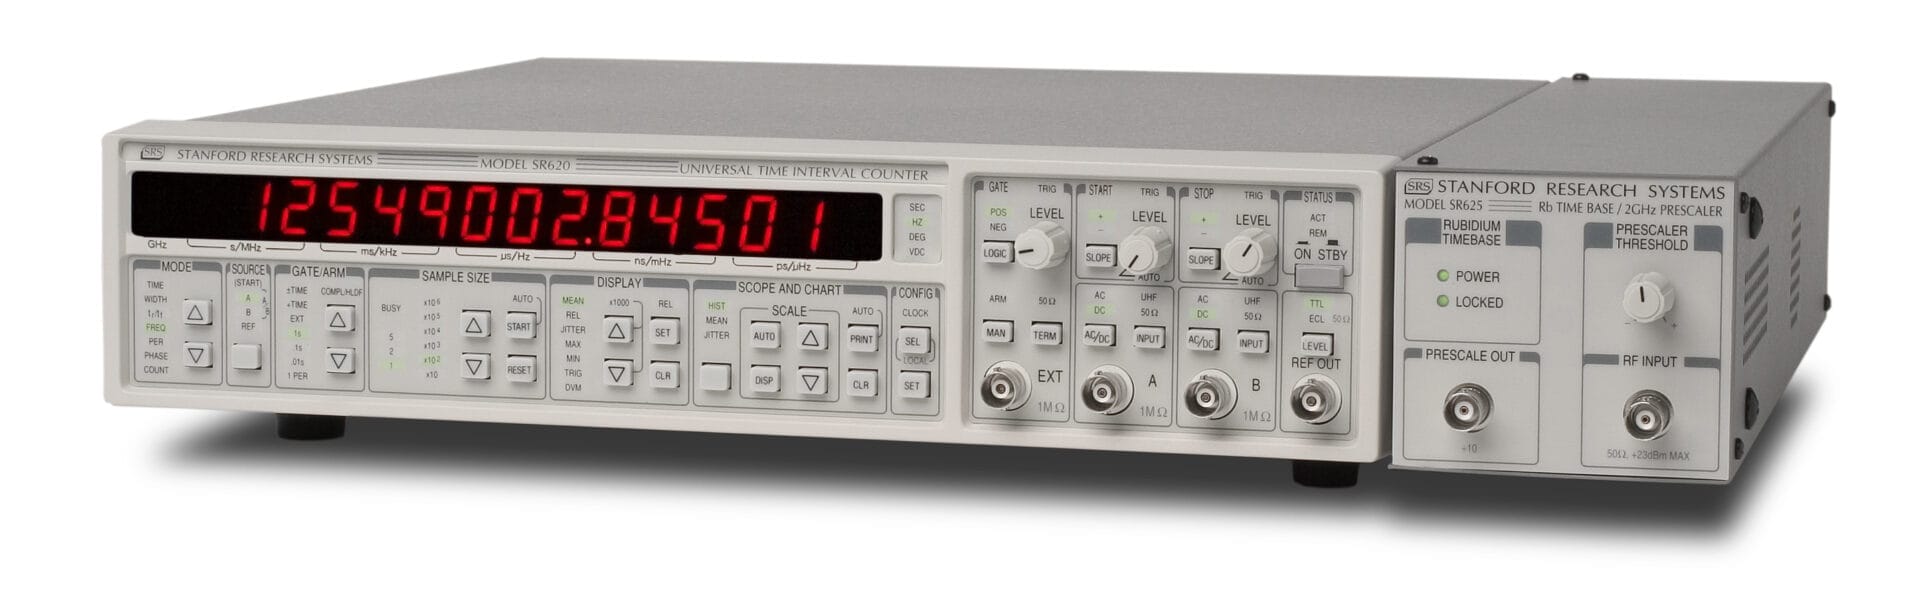 Stanford Research SR625 Frequency Counter w/ Rubidium Timebase